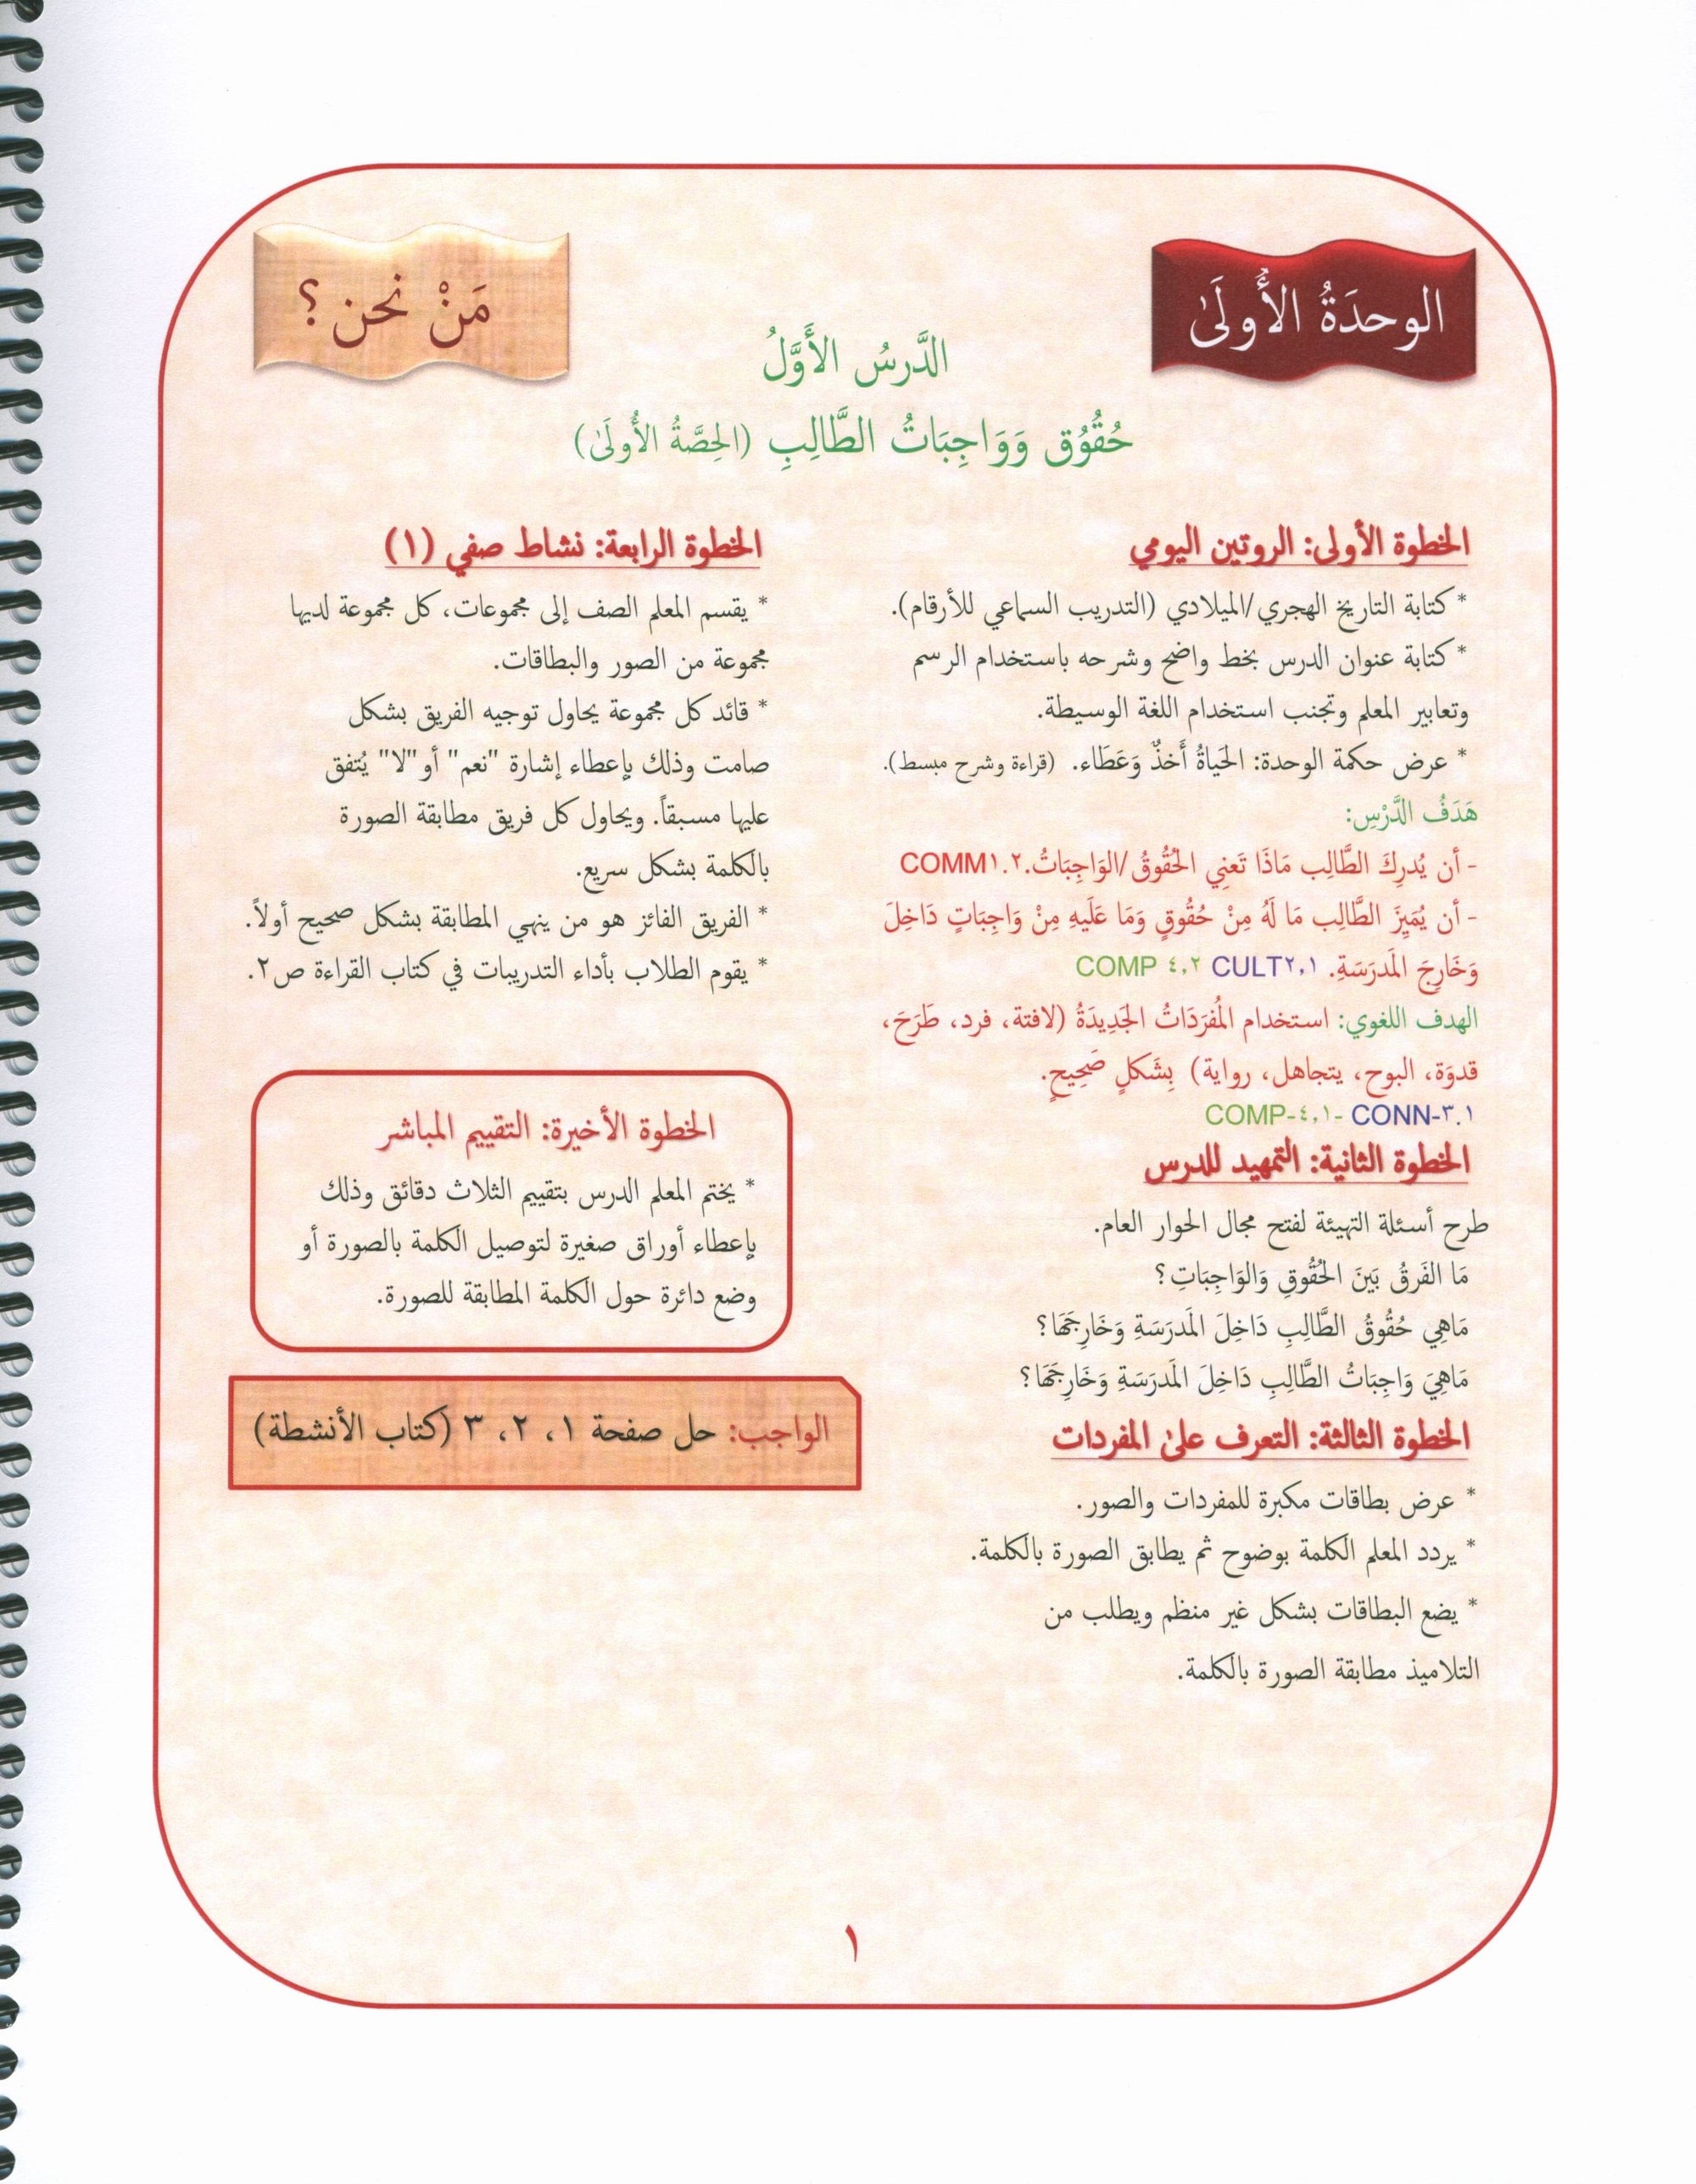 Our Language Is Our Pride Teacher's Guide Level 4 لغتنا فخرنا